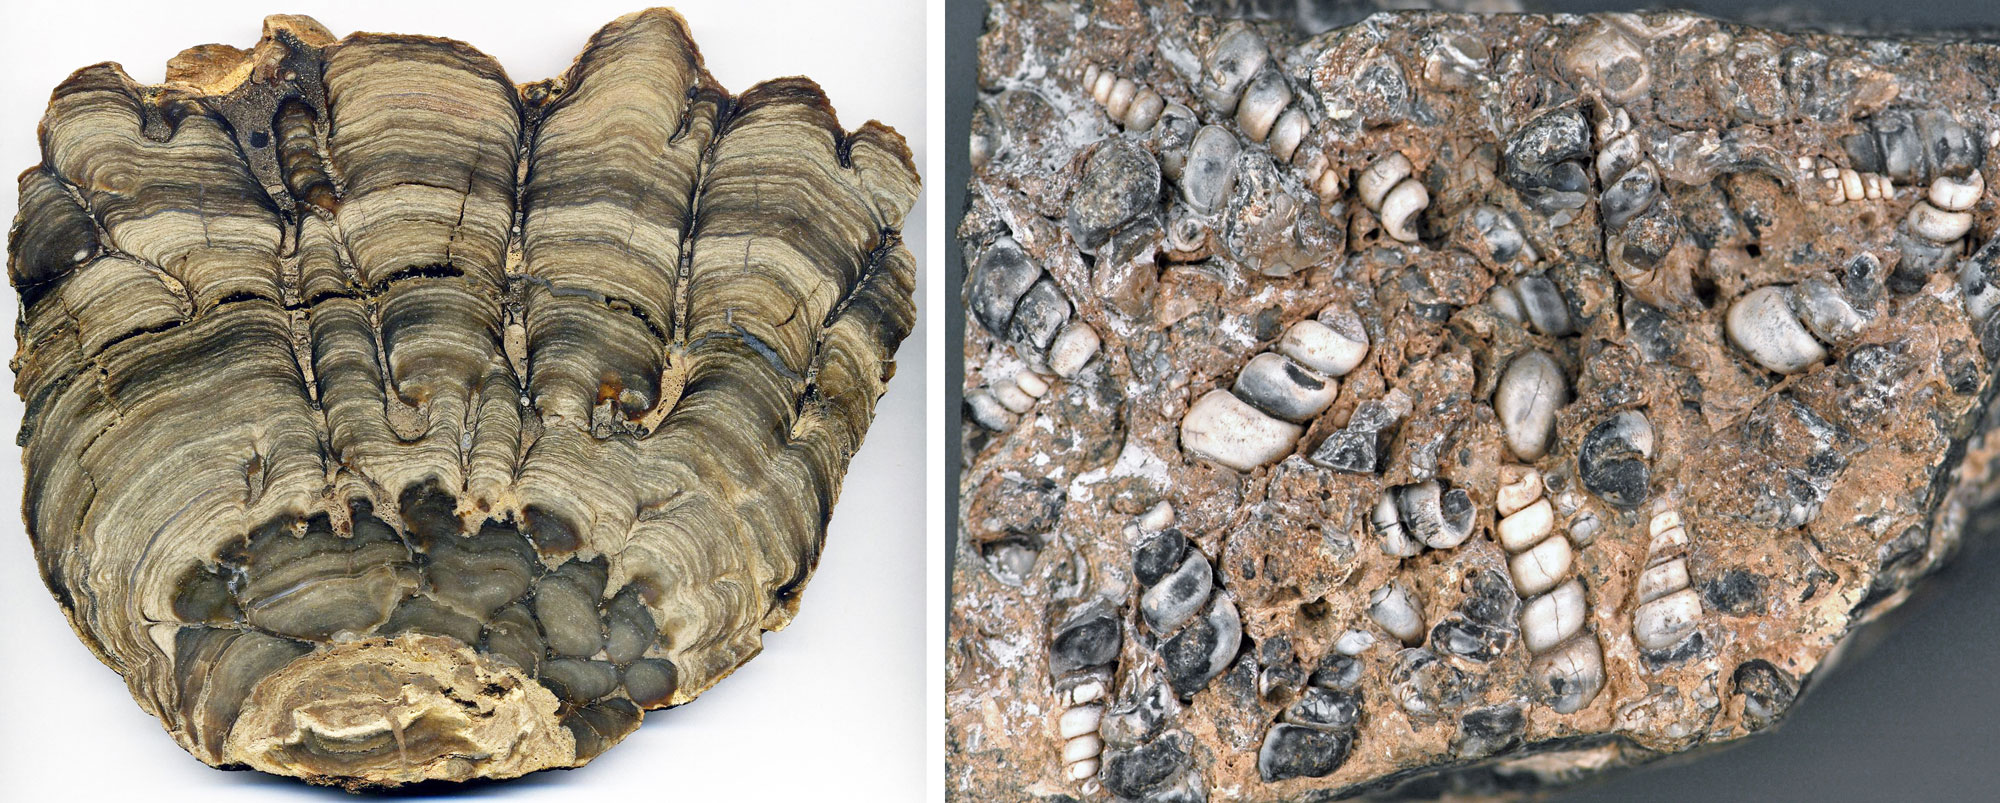 2-panel image of fossil from Eocene Lake Gosiute, Wyoming. Panel 1: Fossil stromatolite. This fossil is cut lengthwise to show the layers within. Layers range from beige to gray. The upper part of the specimen is undulate. Panel 2: So-called turritella agate, a type of chert preserving dense aggregations of high-spired snails. The photo shows snail shells that range from white to gray preserved in a beige-orange rock matrix.